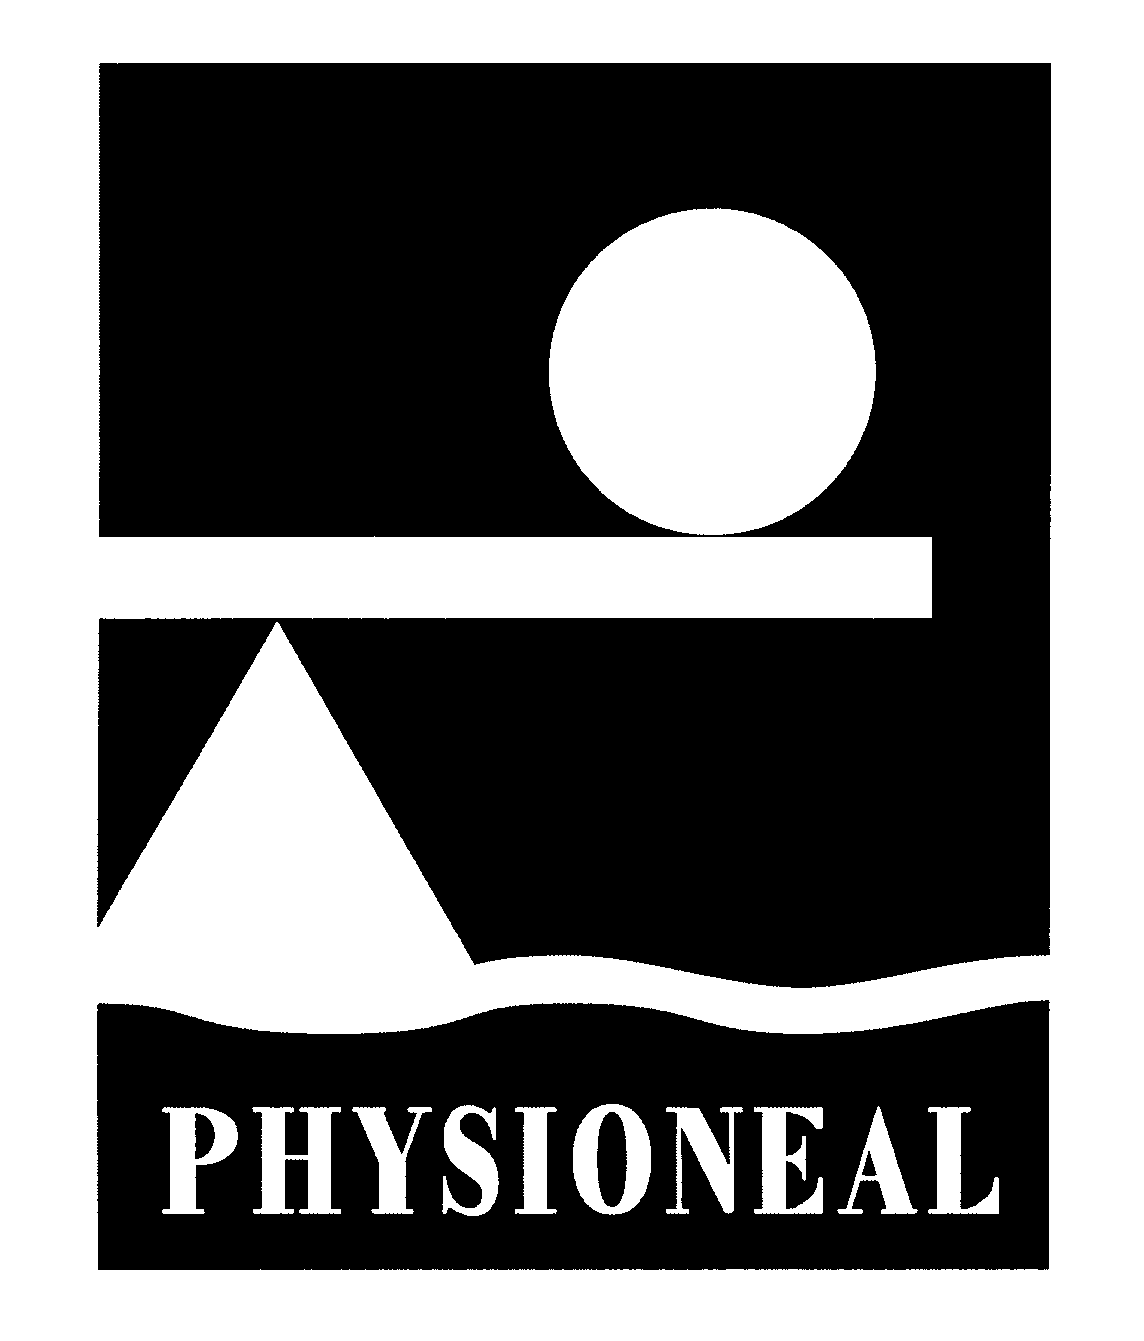 PHYSIONEAL